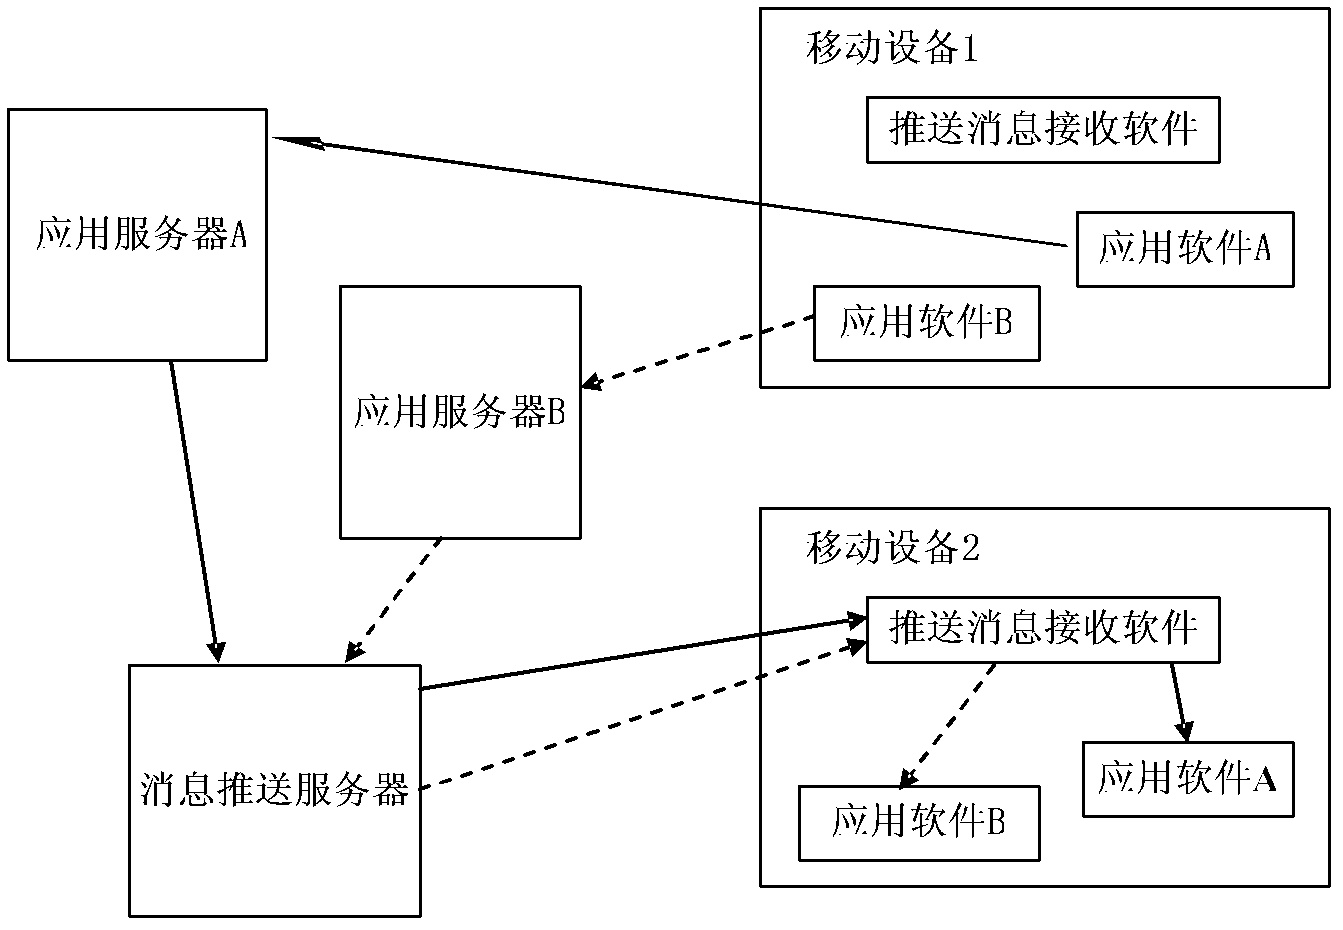 Information sharing method and system based on relationship objects